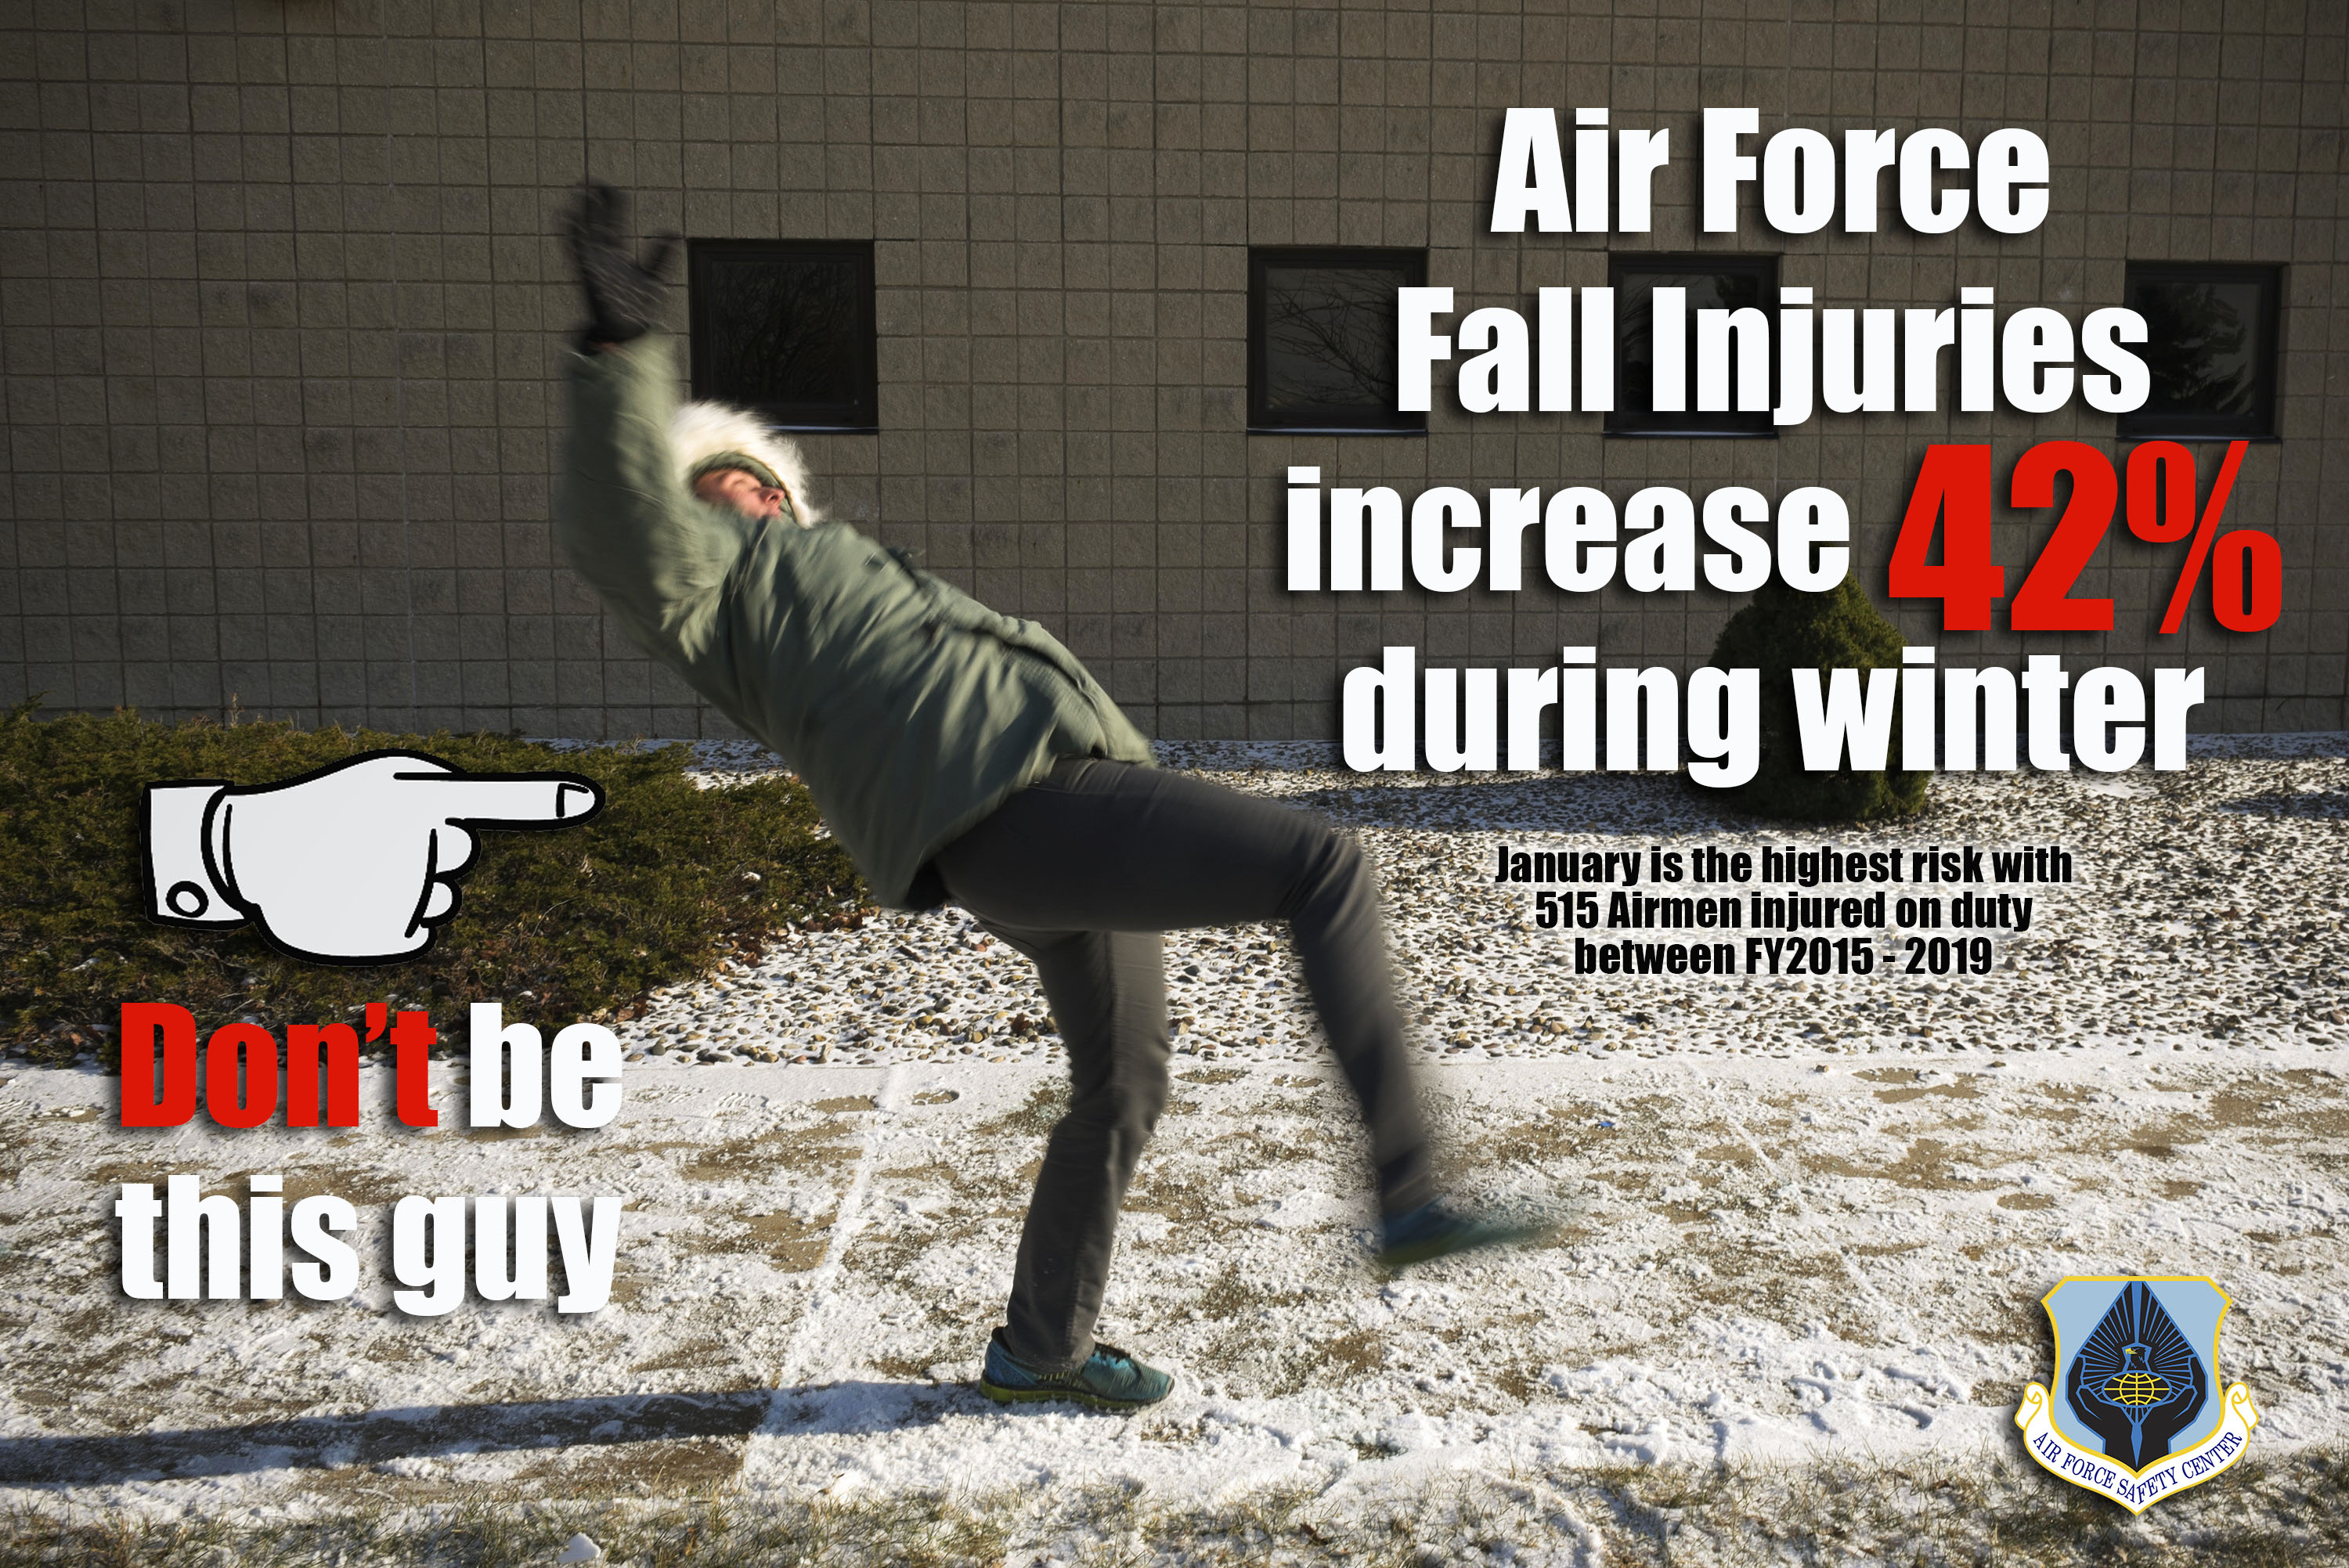 Link to Fall Injuries poster - Airman slipping on icy sidewalk